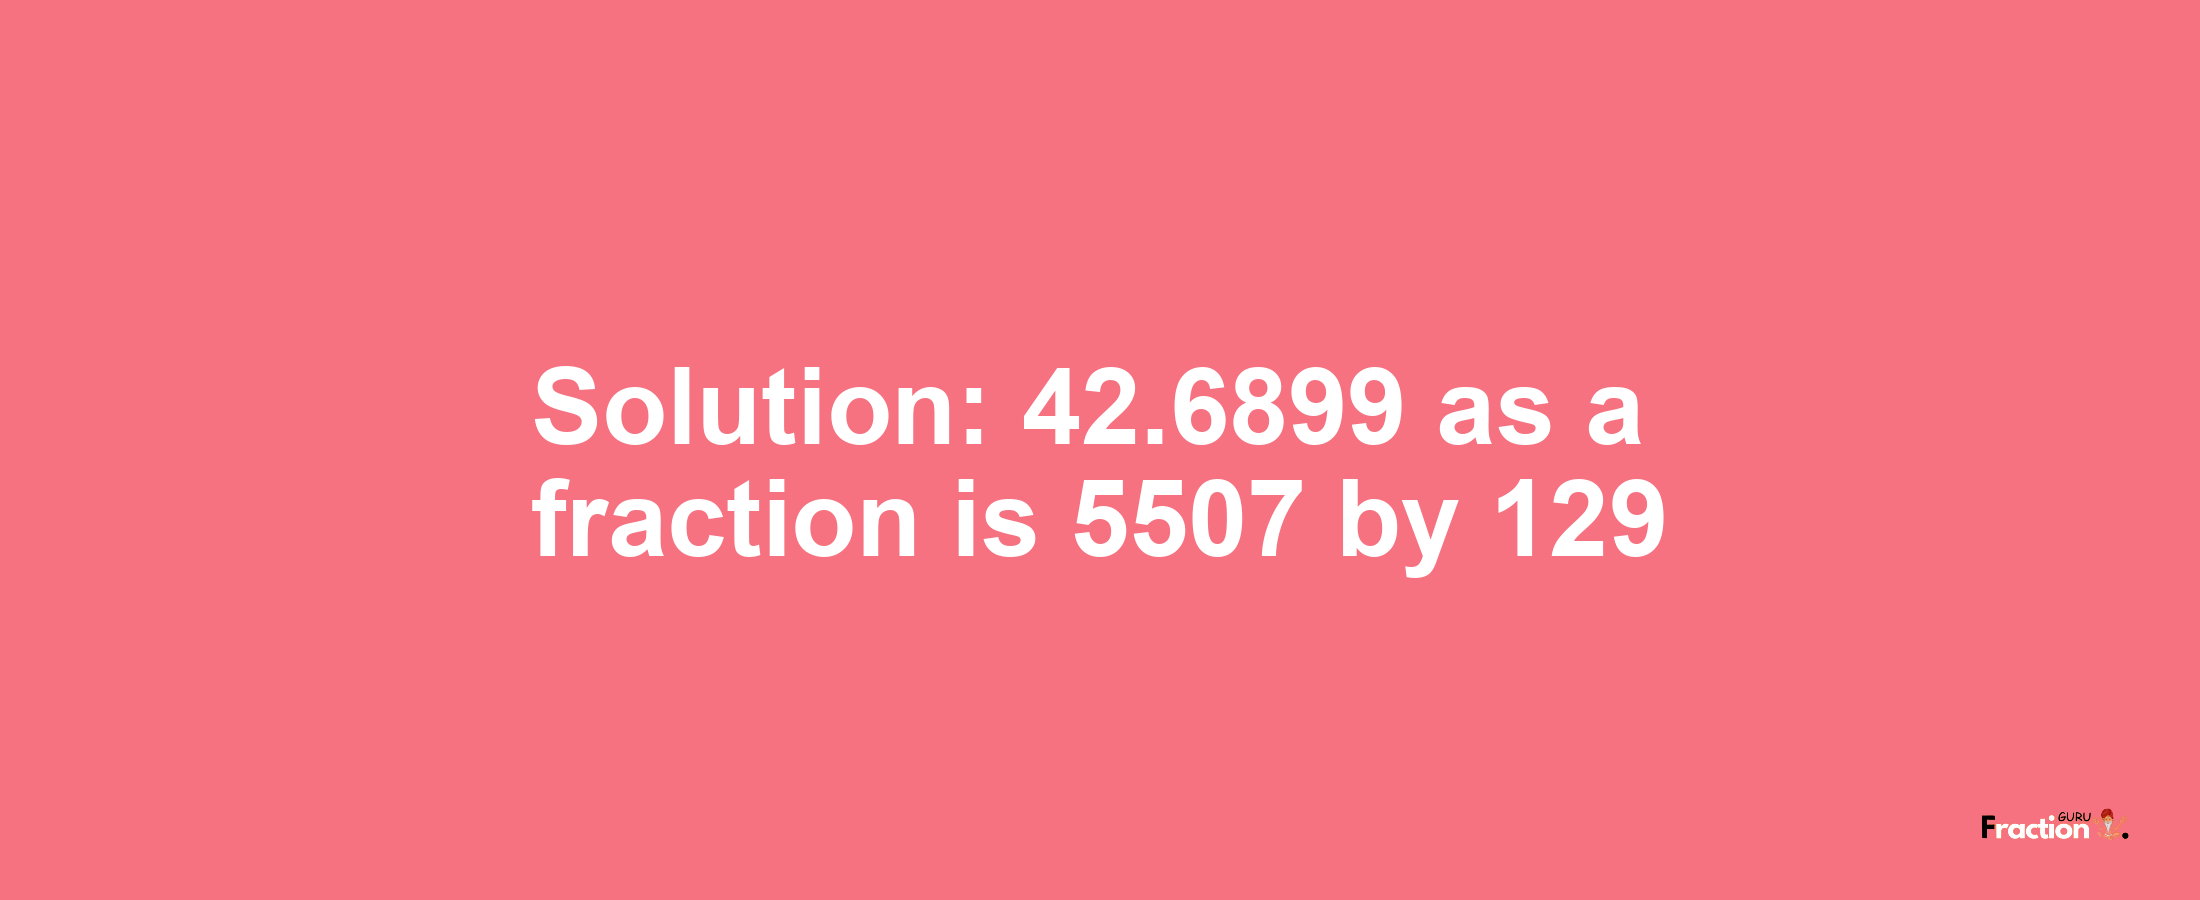 Solution:42.6899 as a fraction is 5507/129